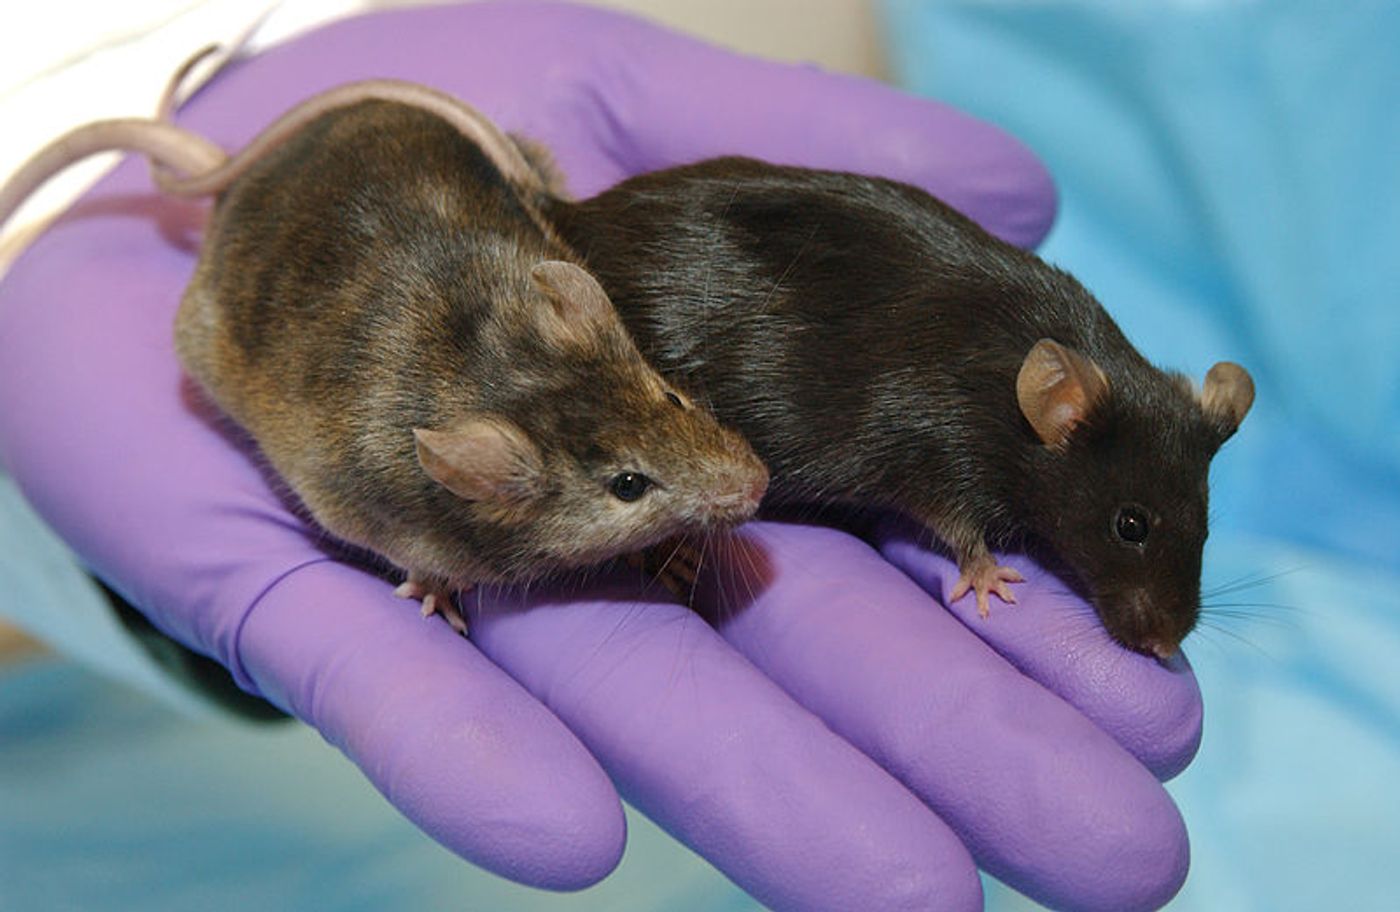 A laboratory mouse in which a gene affecting hair growth has been knocked out (left), is shown next to a normal lab mouse. / Credit: Maggie Bartlett, NHGRI.